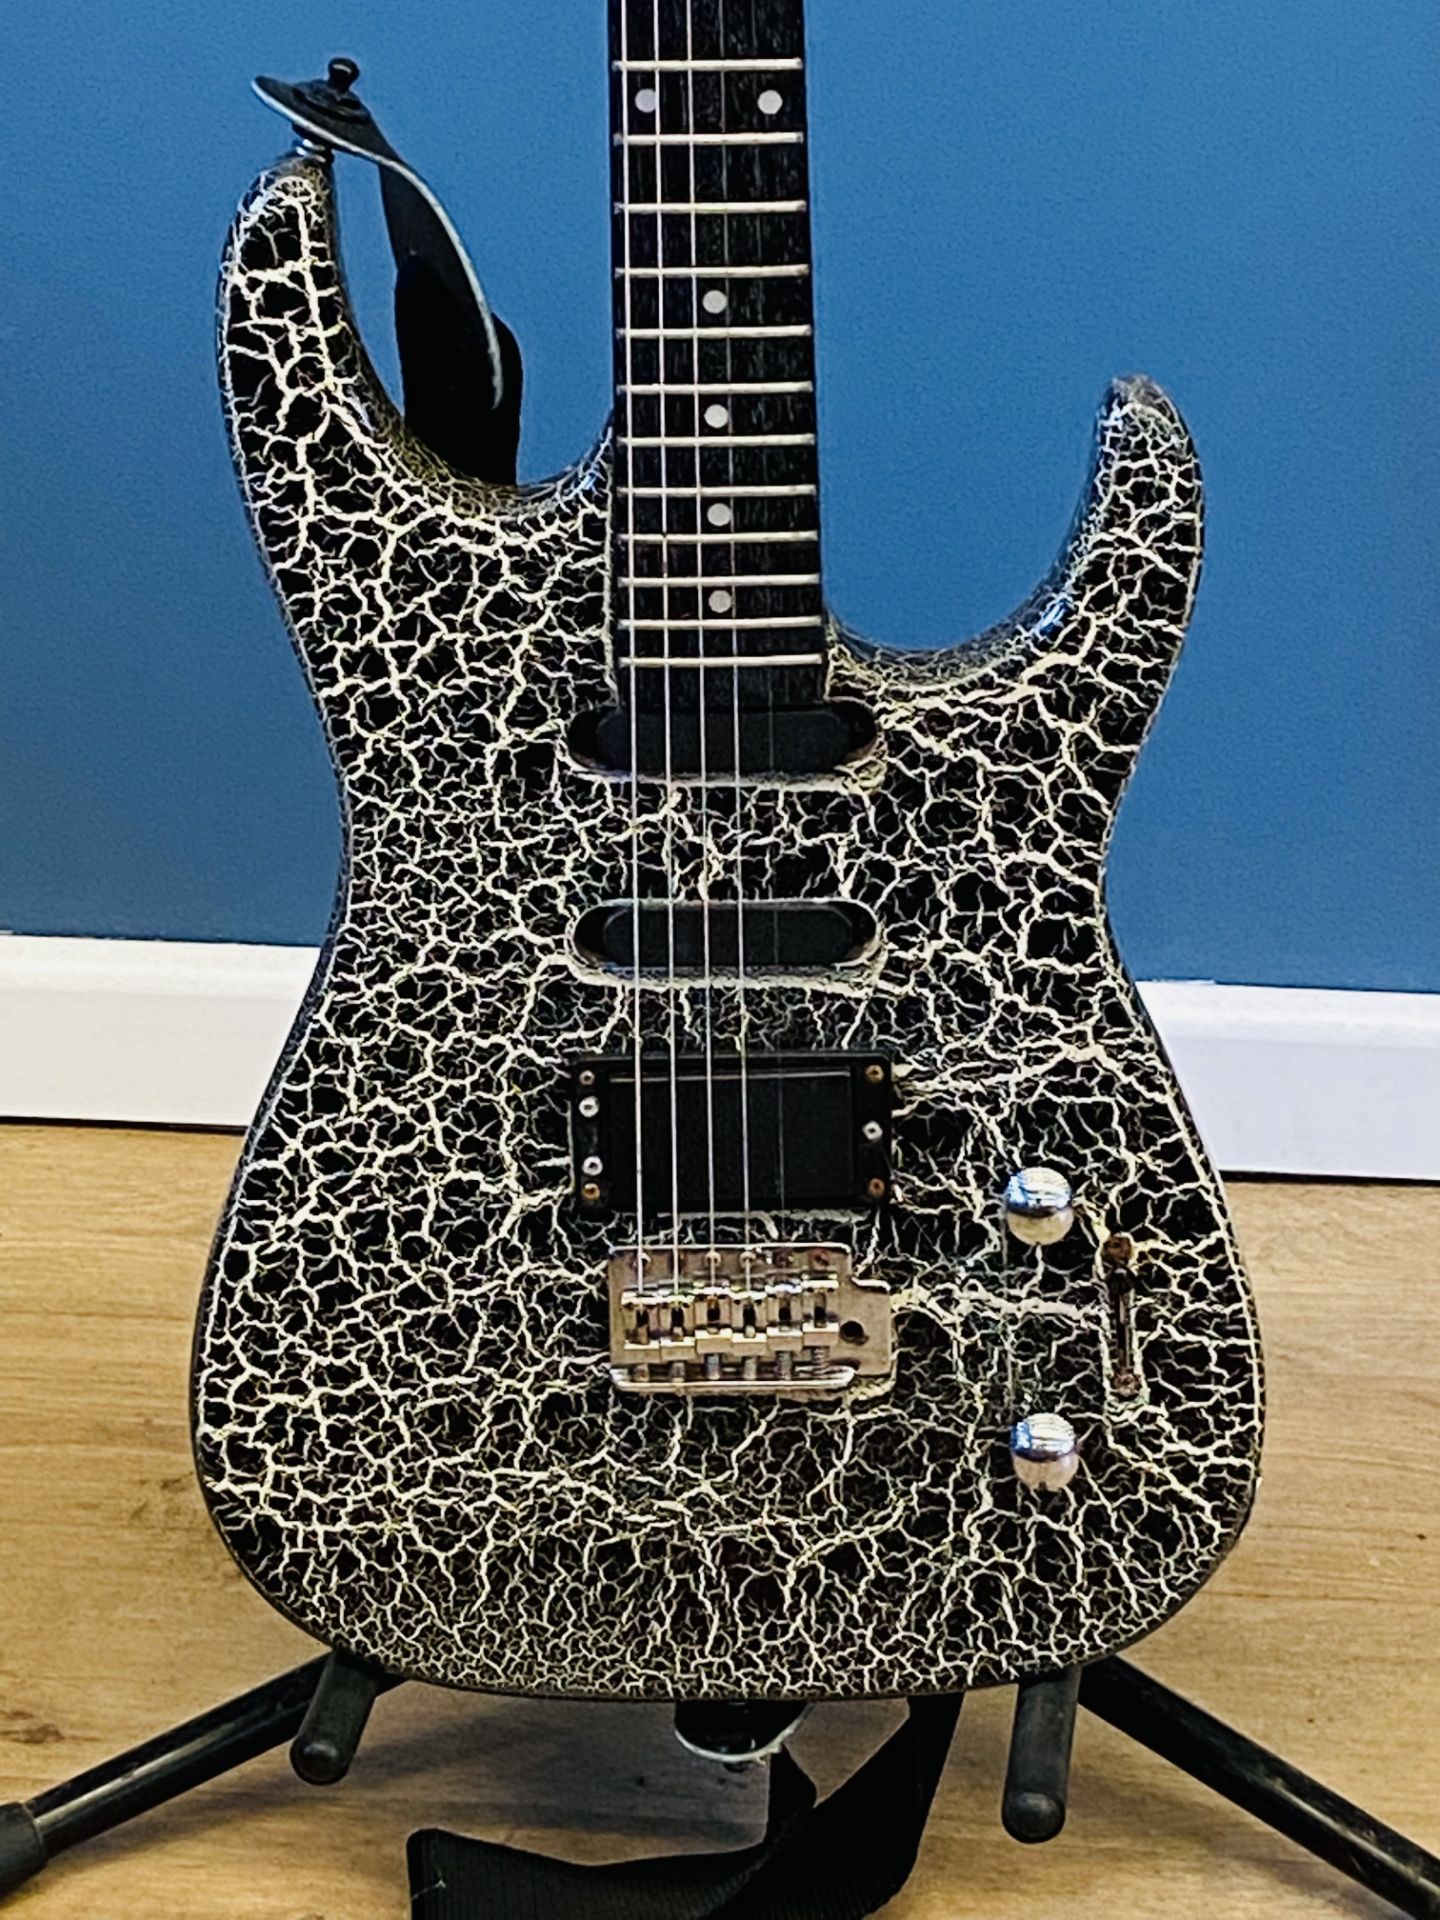 Pacer Phantom Rhythm Master electric guitar with crackle finish. - Image 3 of 4